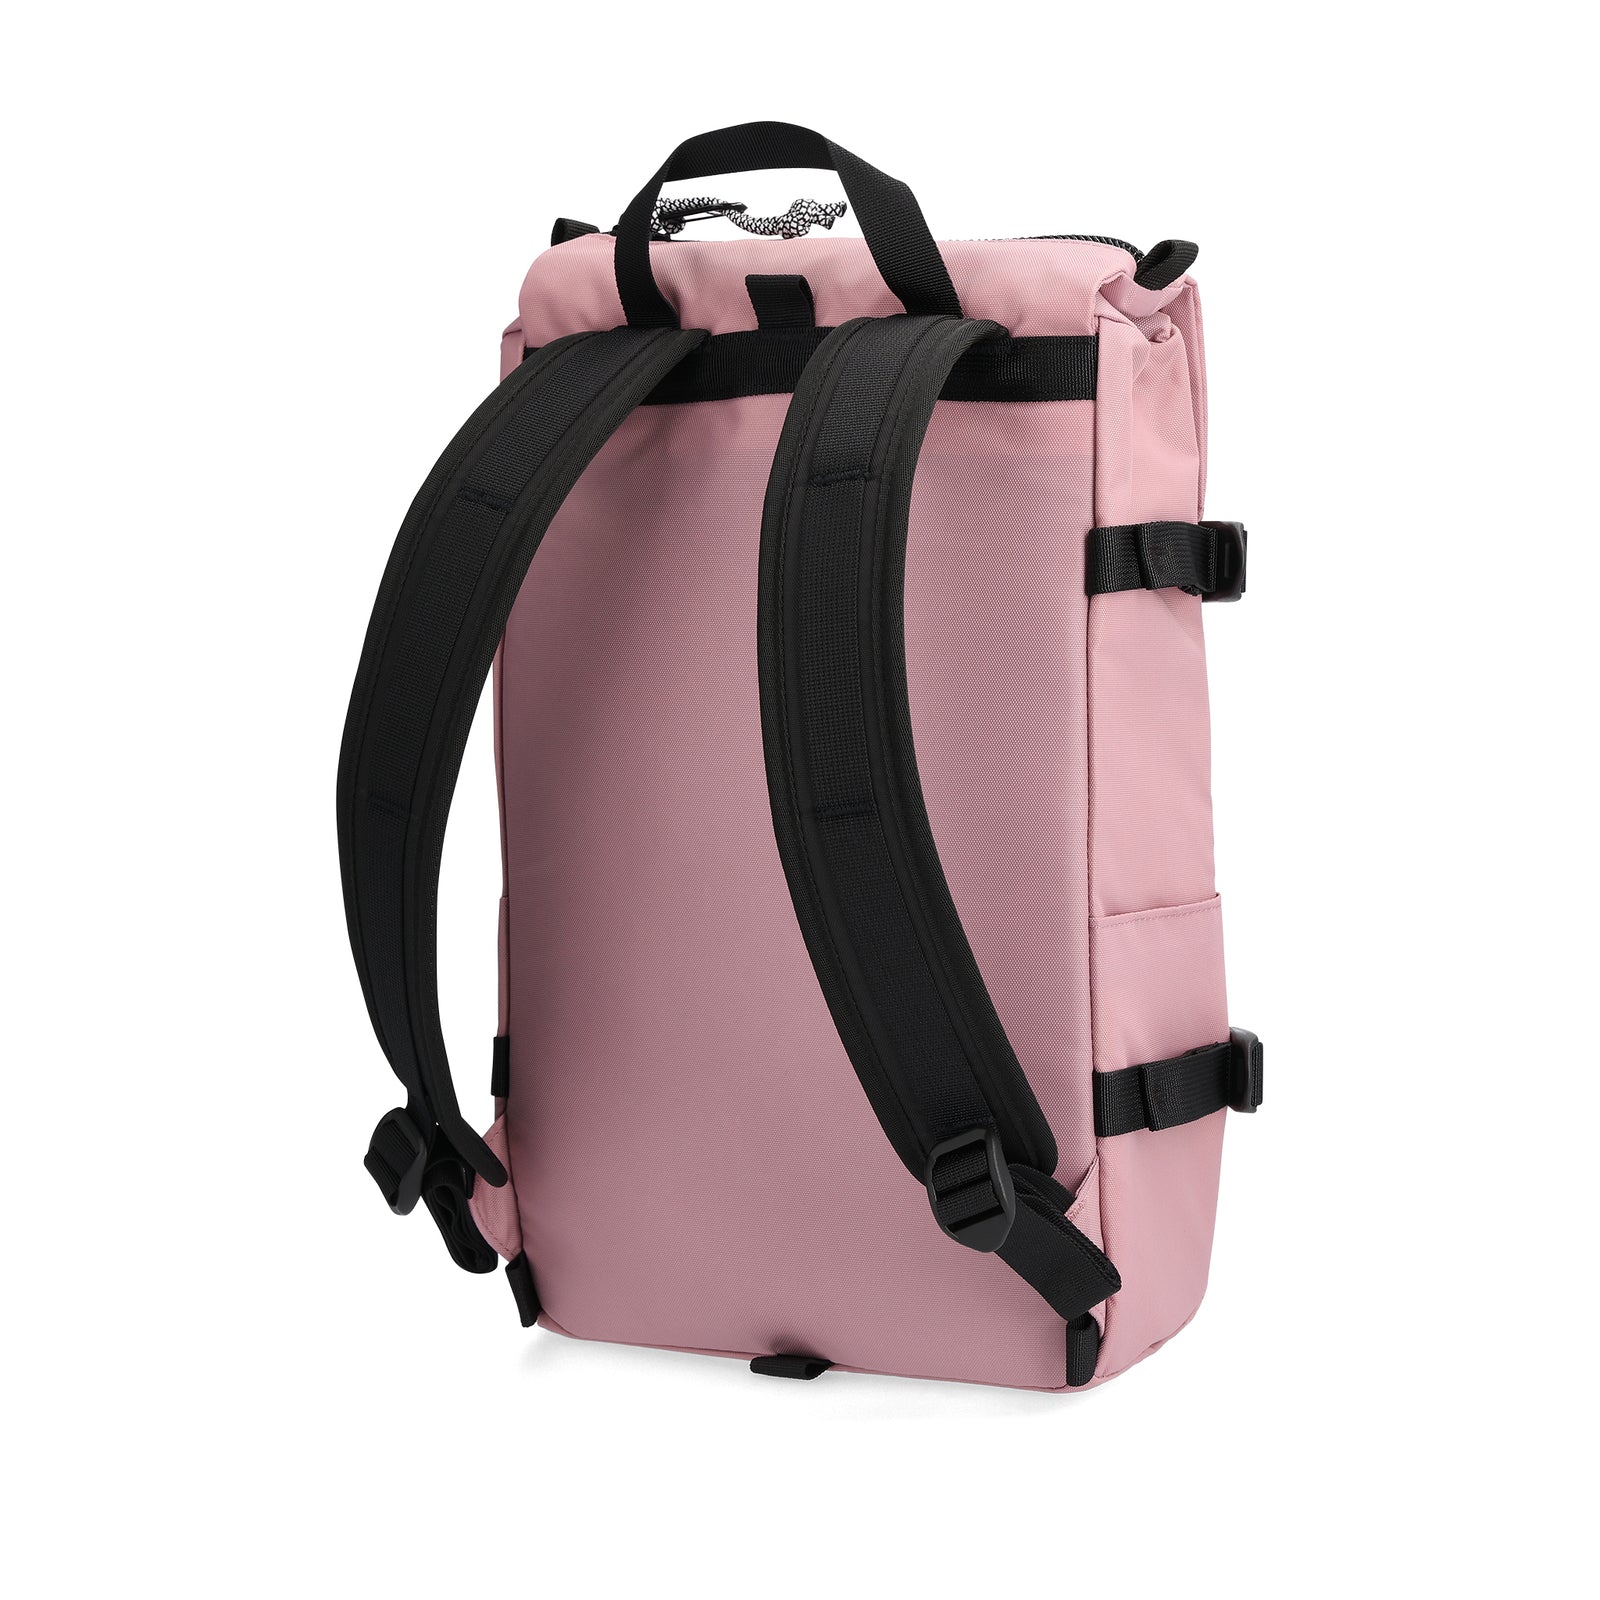 Back View of Topo Designs Rover Pack Classic in "Rose"